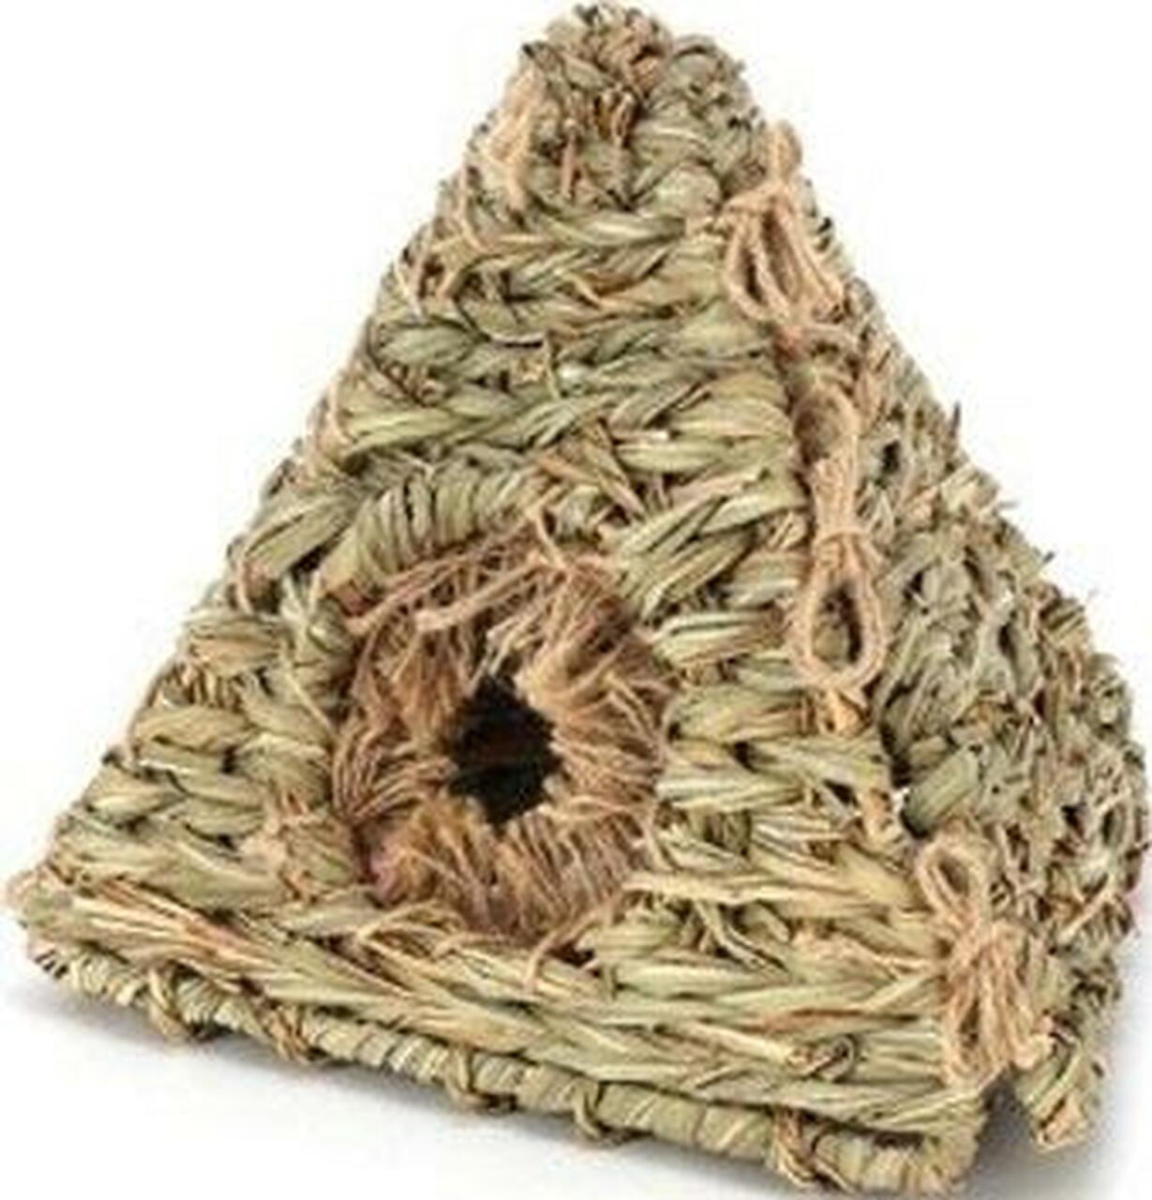 Picture of Ware Manufacturing 911490 8.5 x 8.5 x 2 in. Critter Triangle Hut Toy for Small Animals